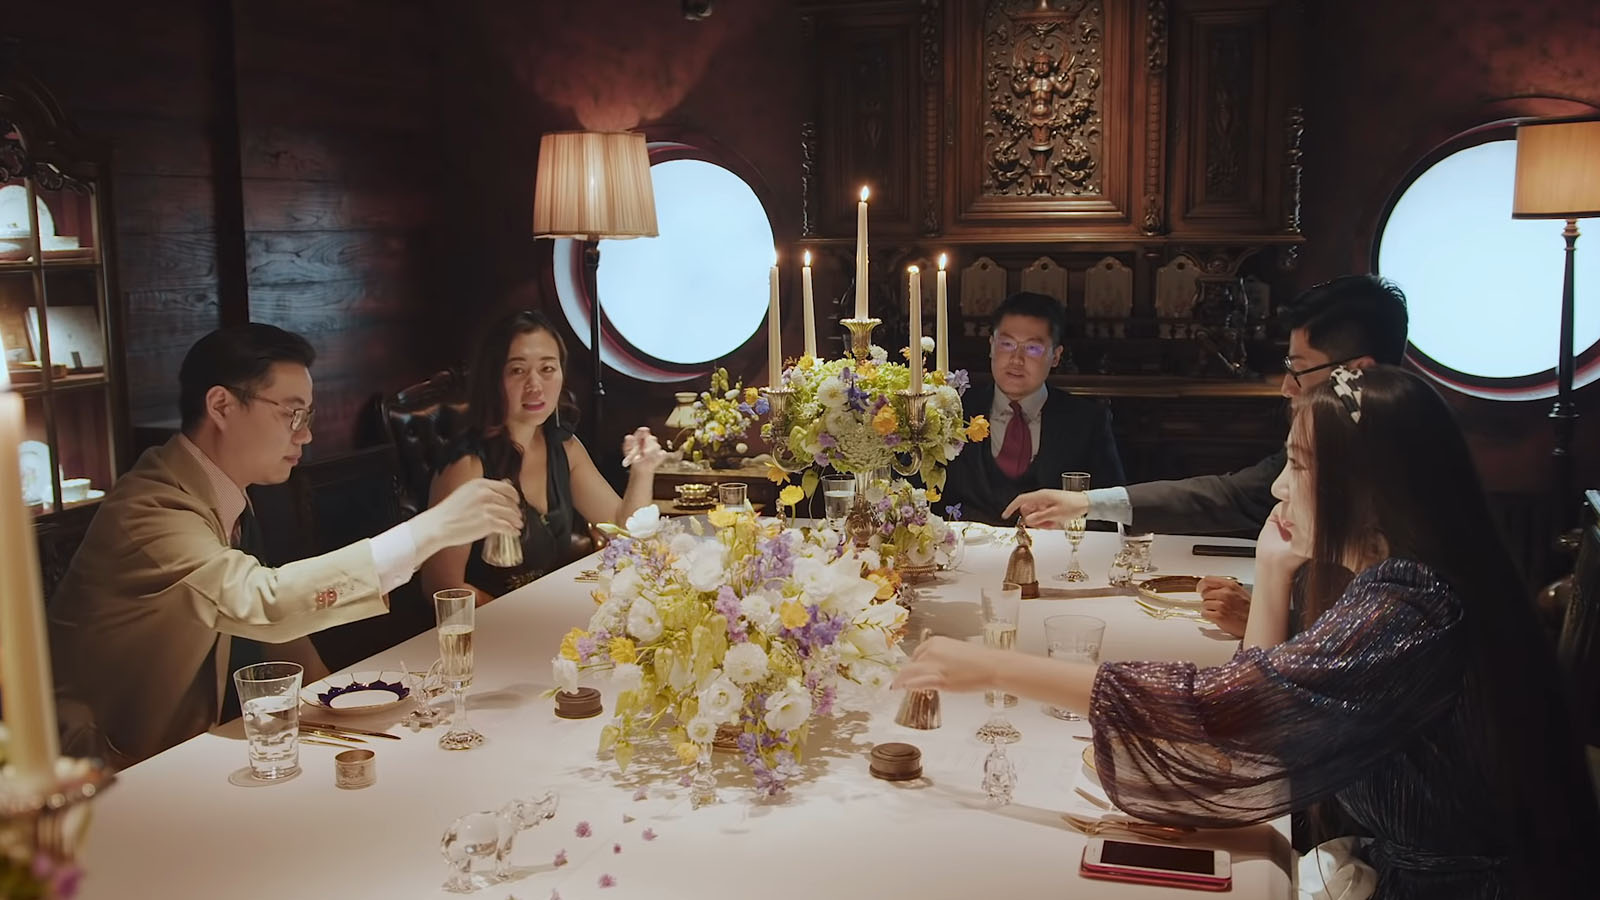 Butlers are trained to serve the tables of wealthy families. Image © MTV Documentary Films